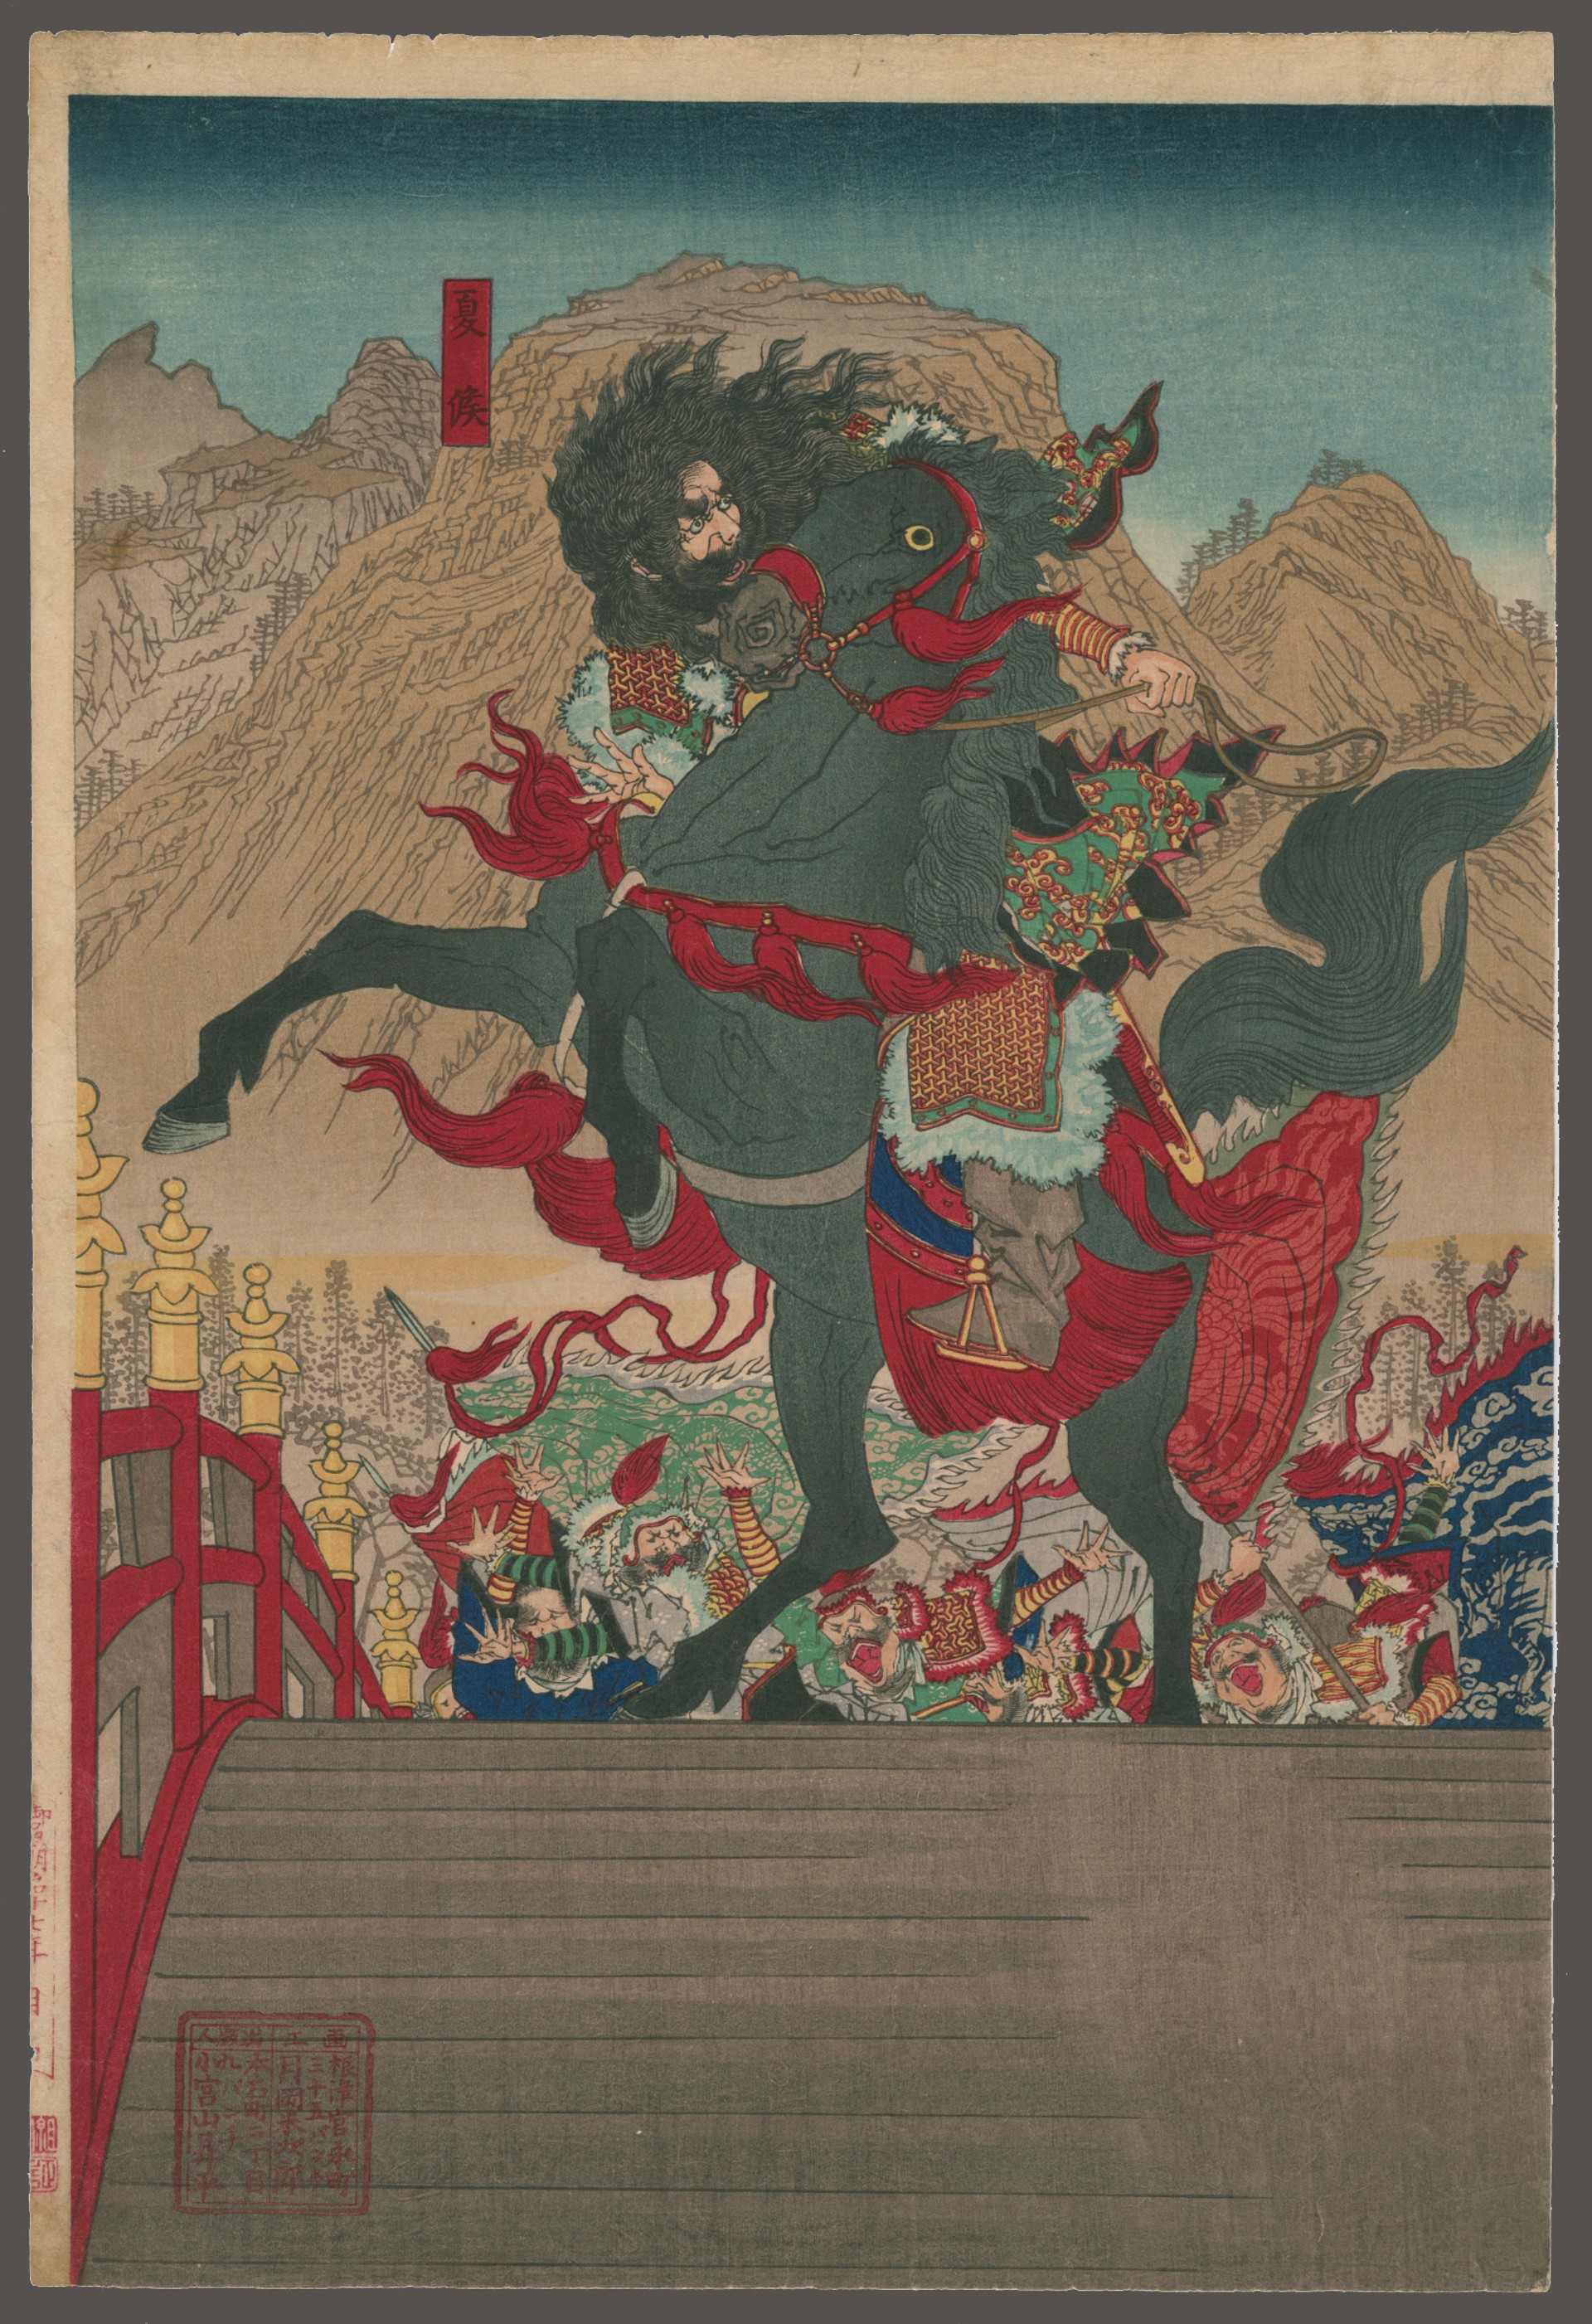 Zhang Fei, at the Zhangban Bridge, Glares back at the Enemy Force of a Million Illustrated Romance of the Three Kingdoms by Yoshitoshi